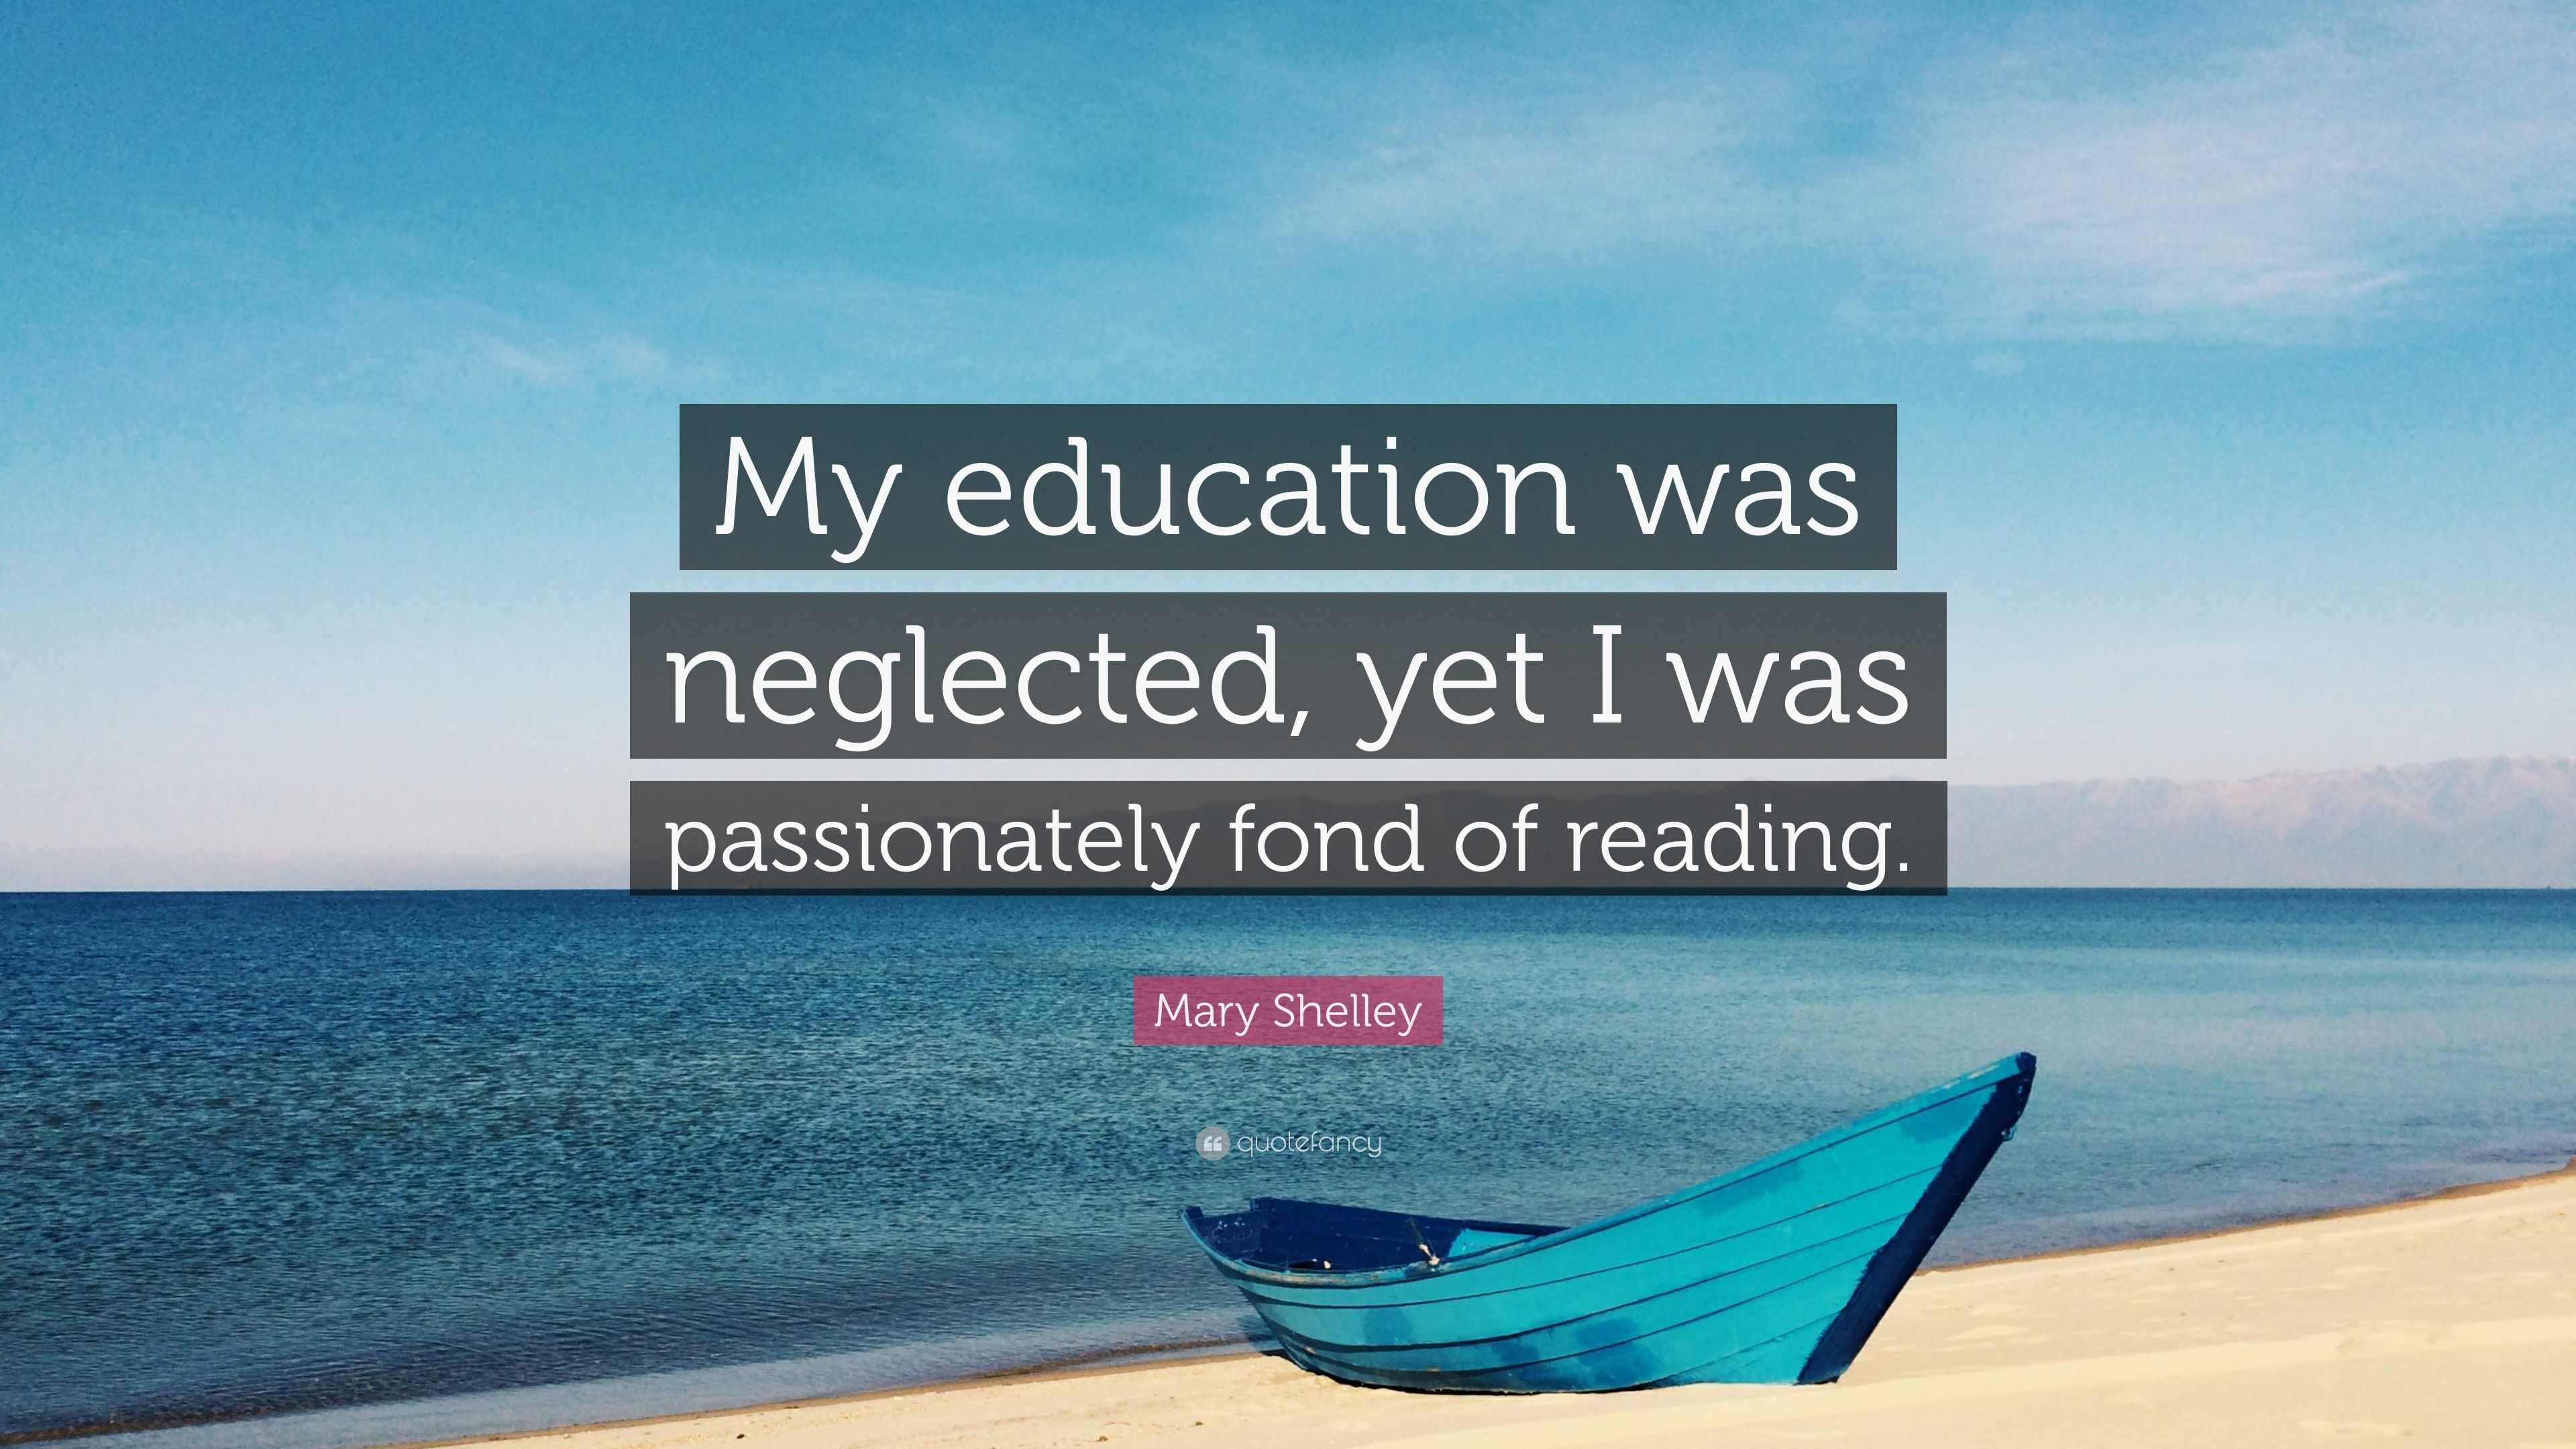 Mary Shelley Quote: “My education was neglected, yet I was passionately ...